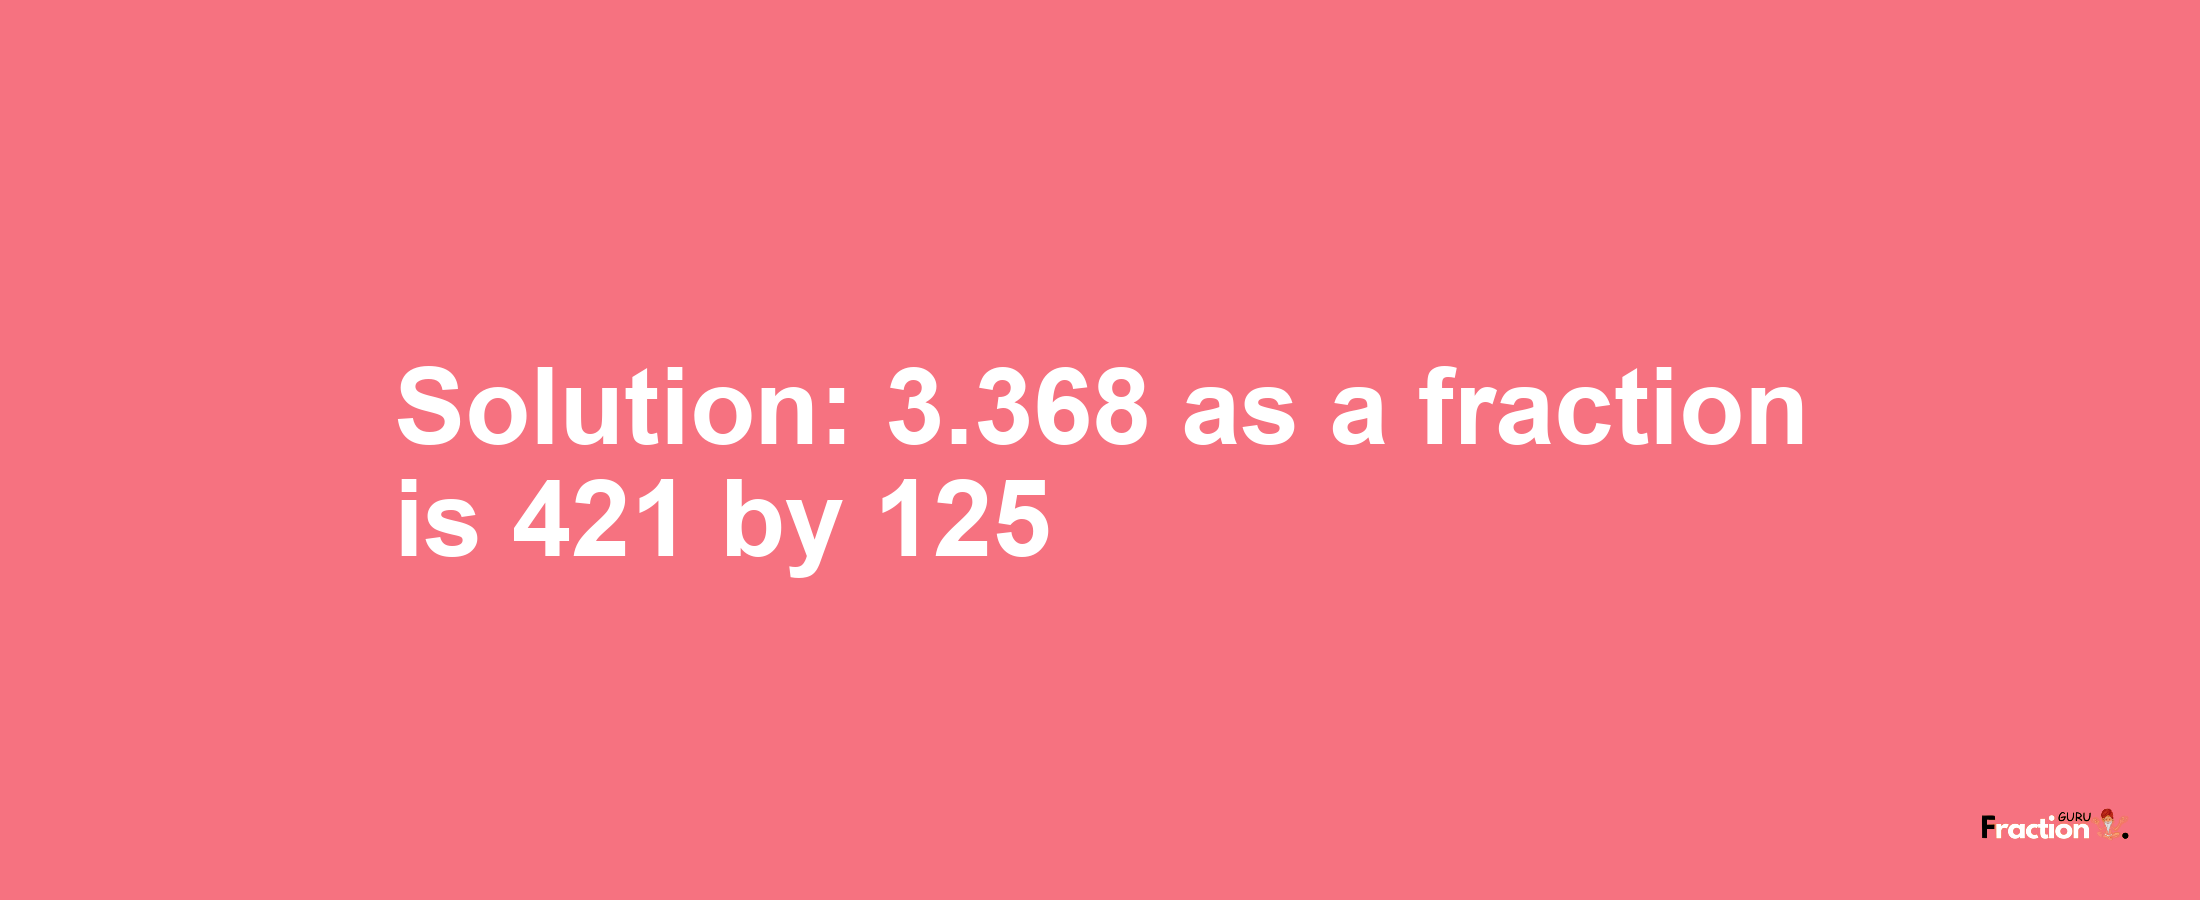 Solution:3.368 as a fraction is 421/125